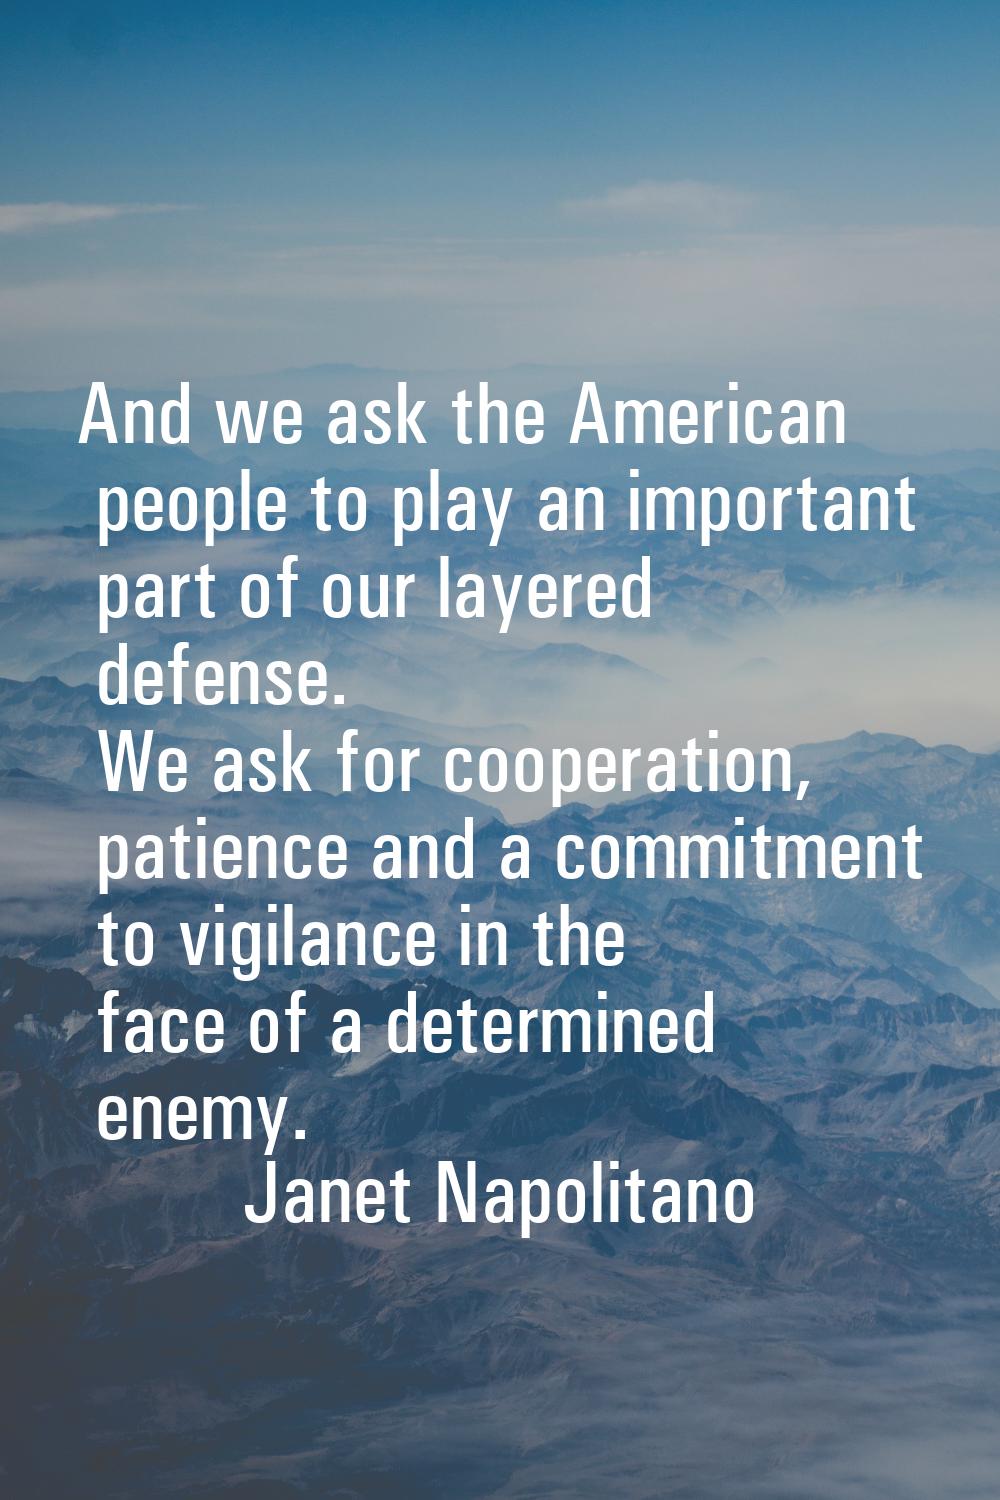 And we ask the American people to play an important part of our layered defense. We ask for coopera